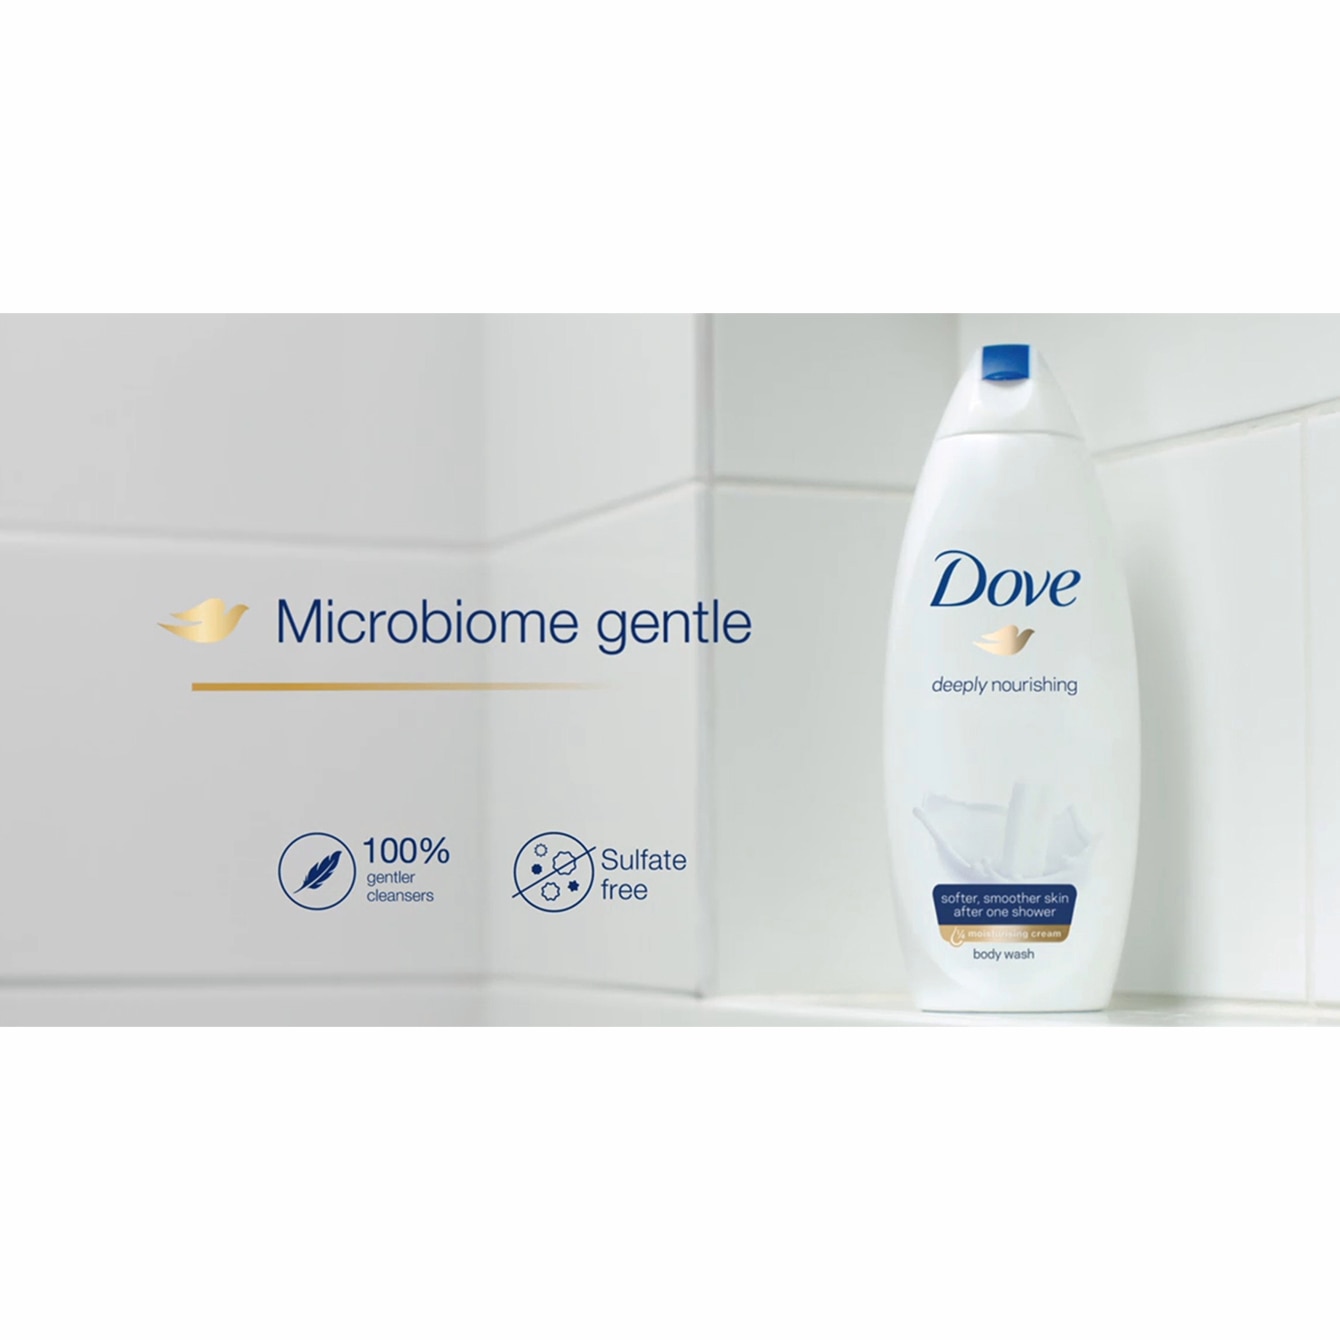 An introduction to skin microbiome from Dove